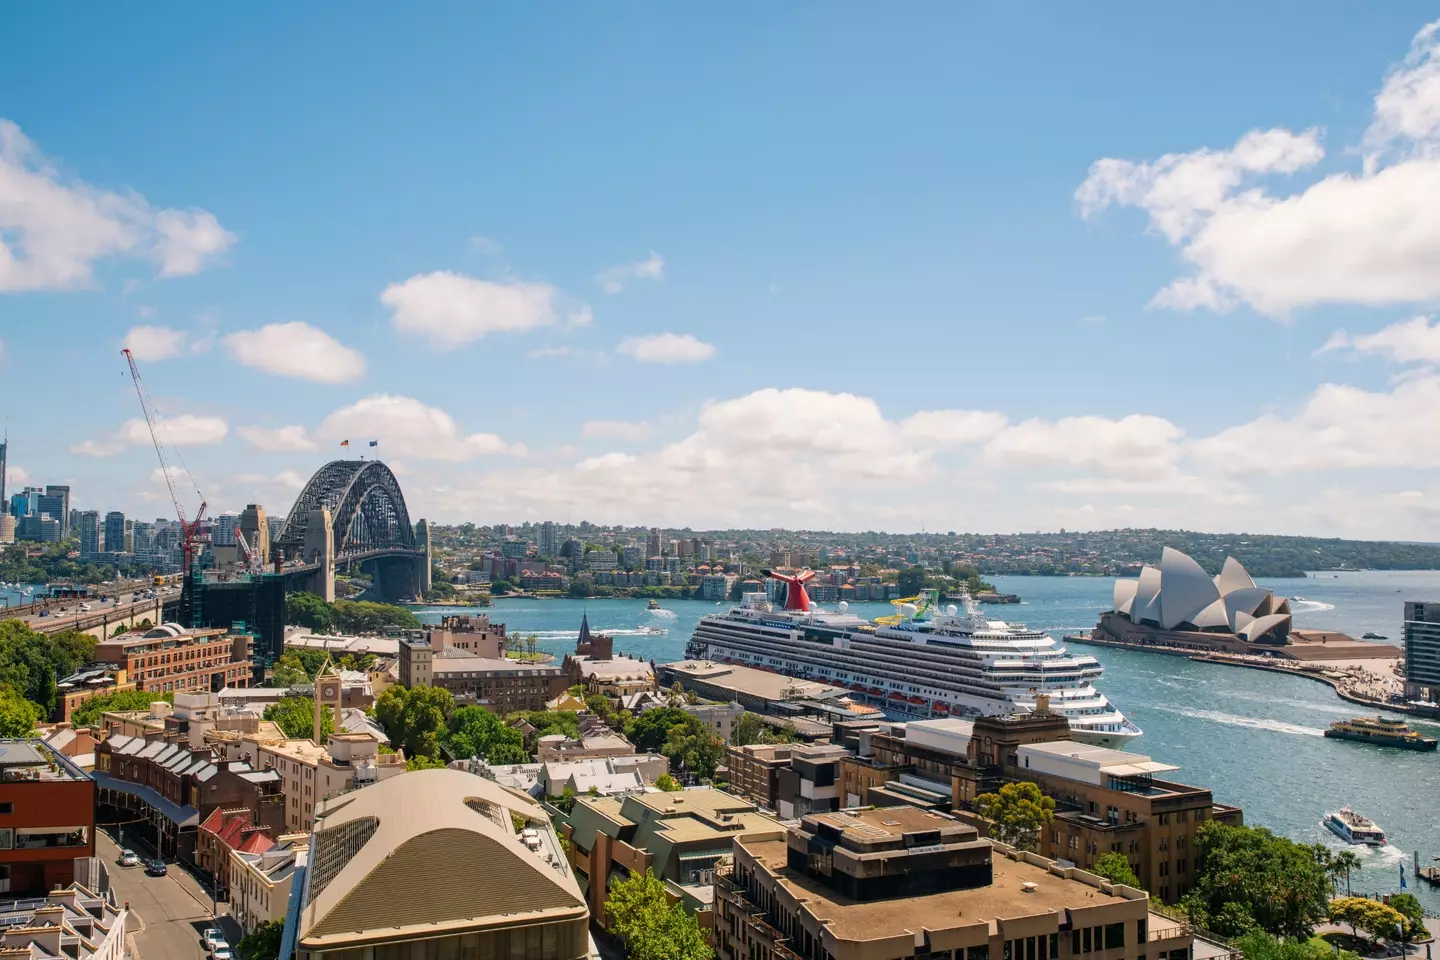 Cruise ship in Sydney Harbour (Getty Stock Images)